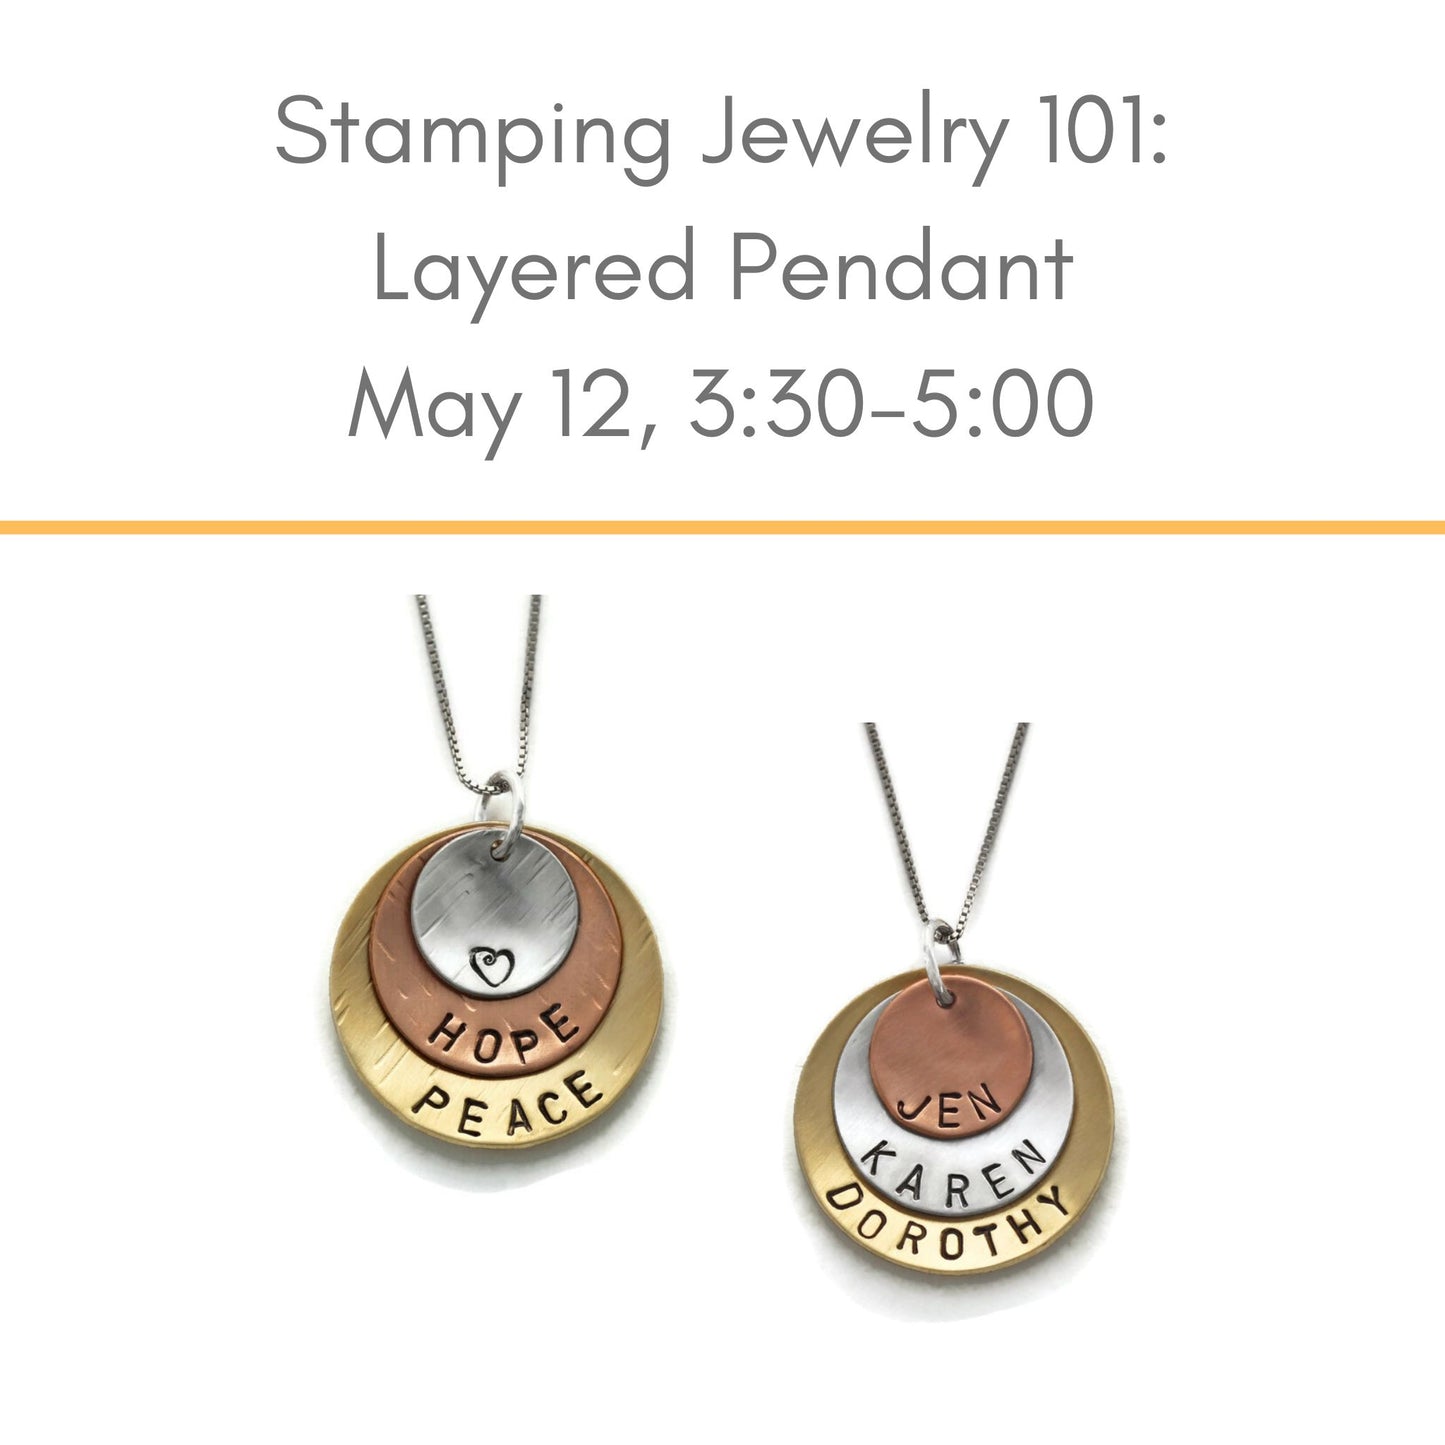 Stamping 101 Layered pendant class May 12